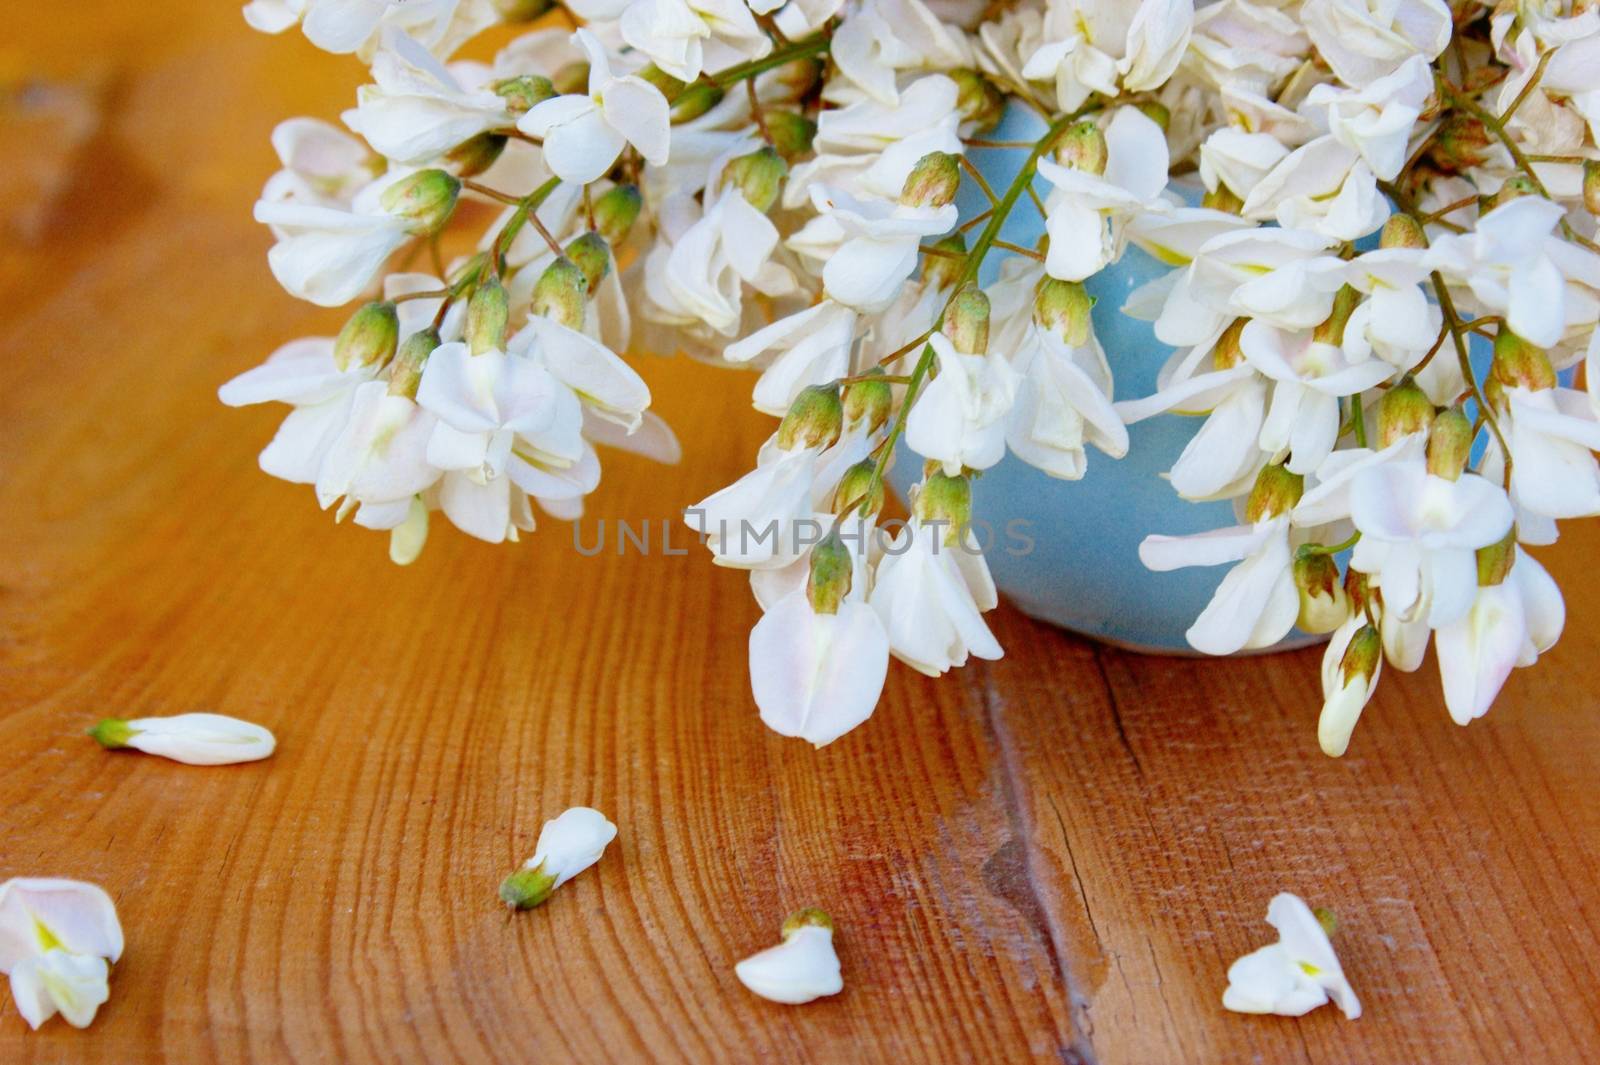 White Wisteria flowers which bloom during springtime, hanging from a ceramic vase onto the wooden board underneath. This Still life image can be used for nature, springtime and floral concepts.
